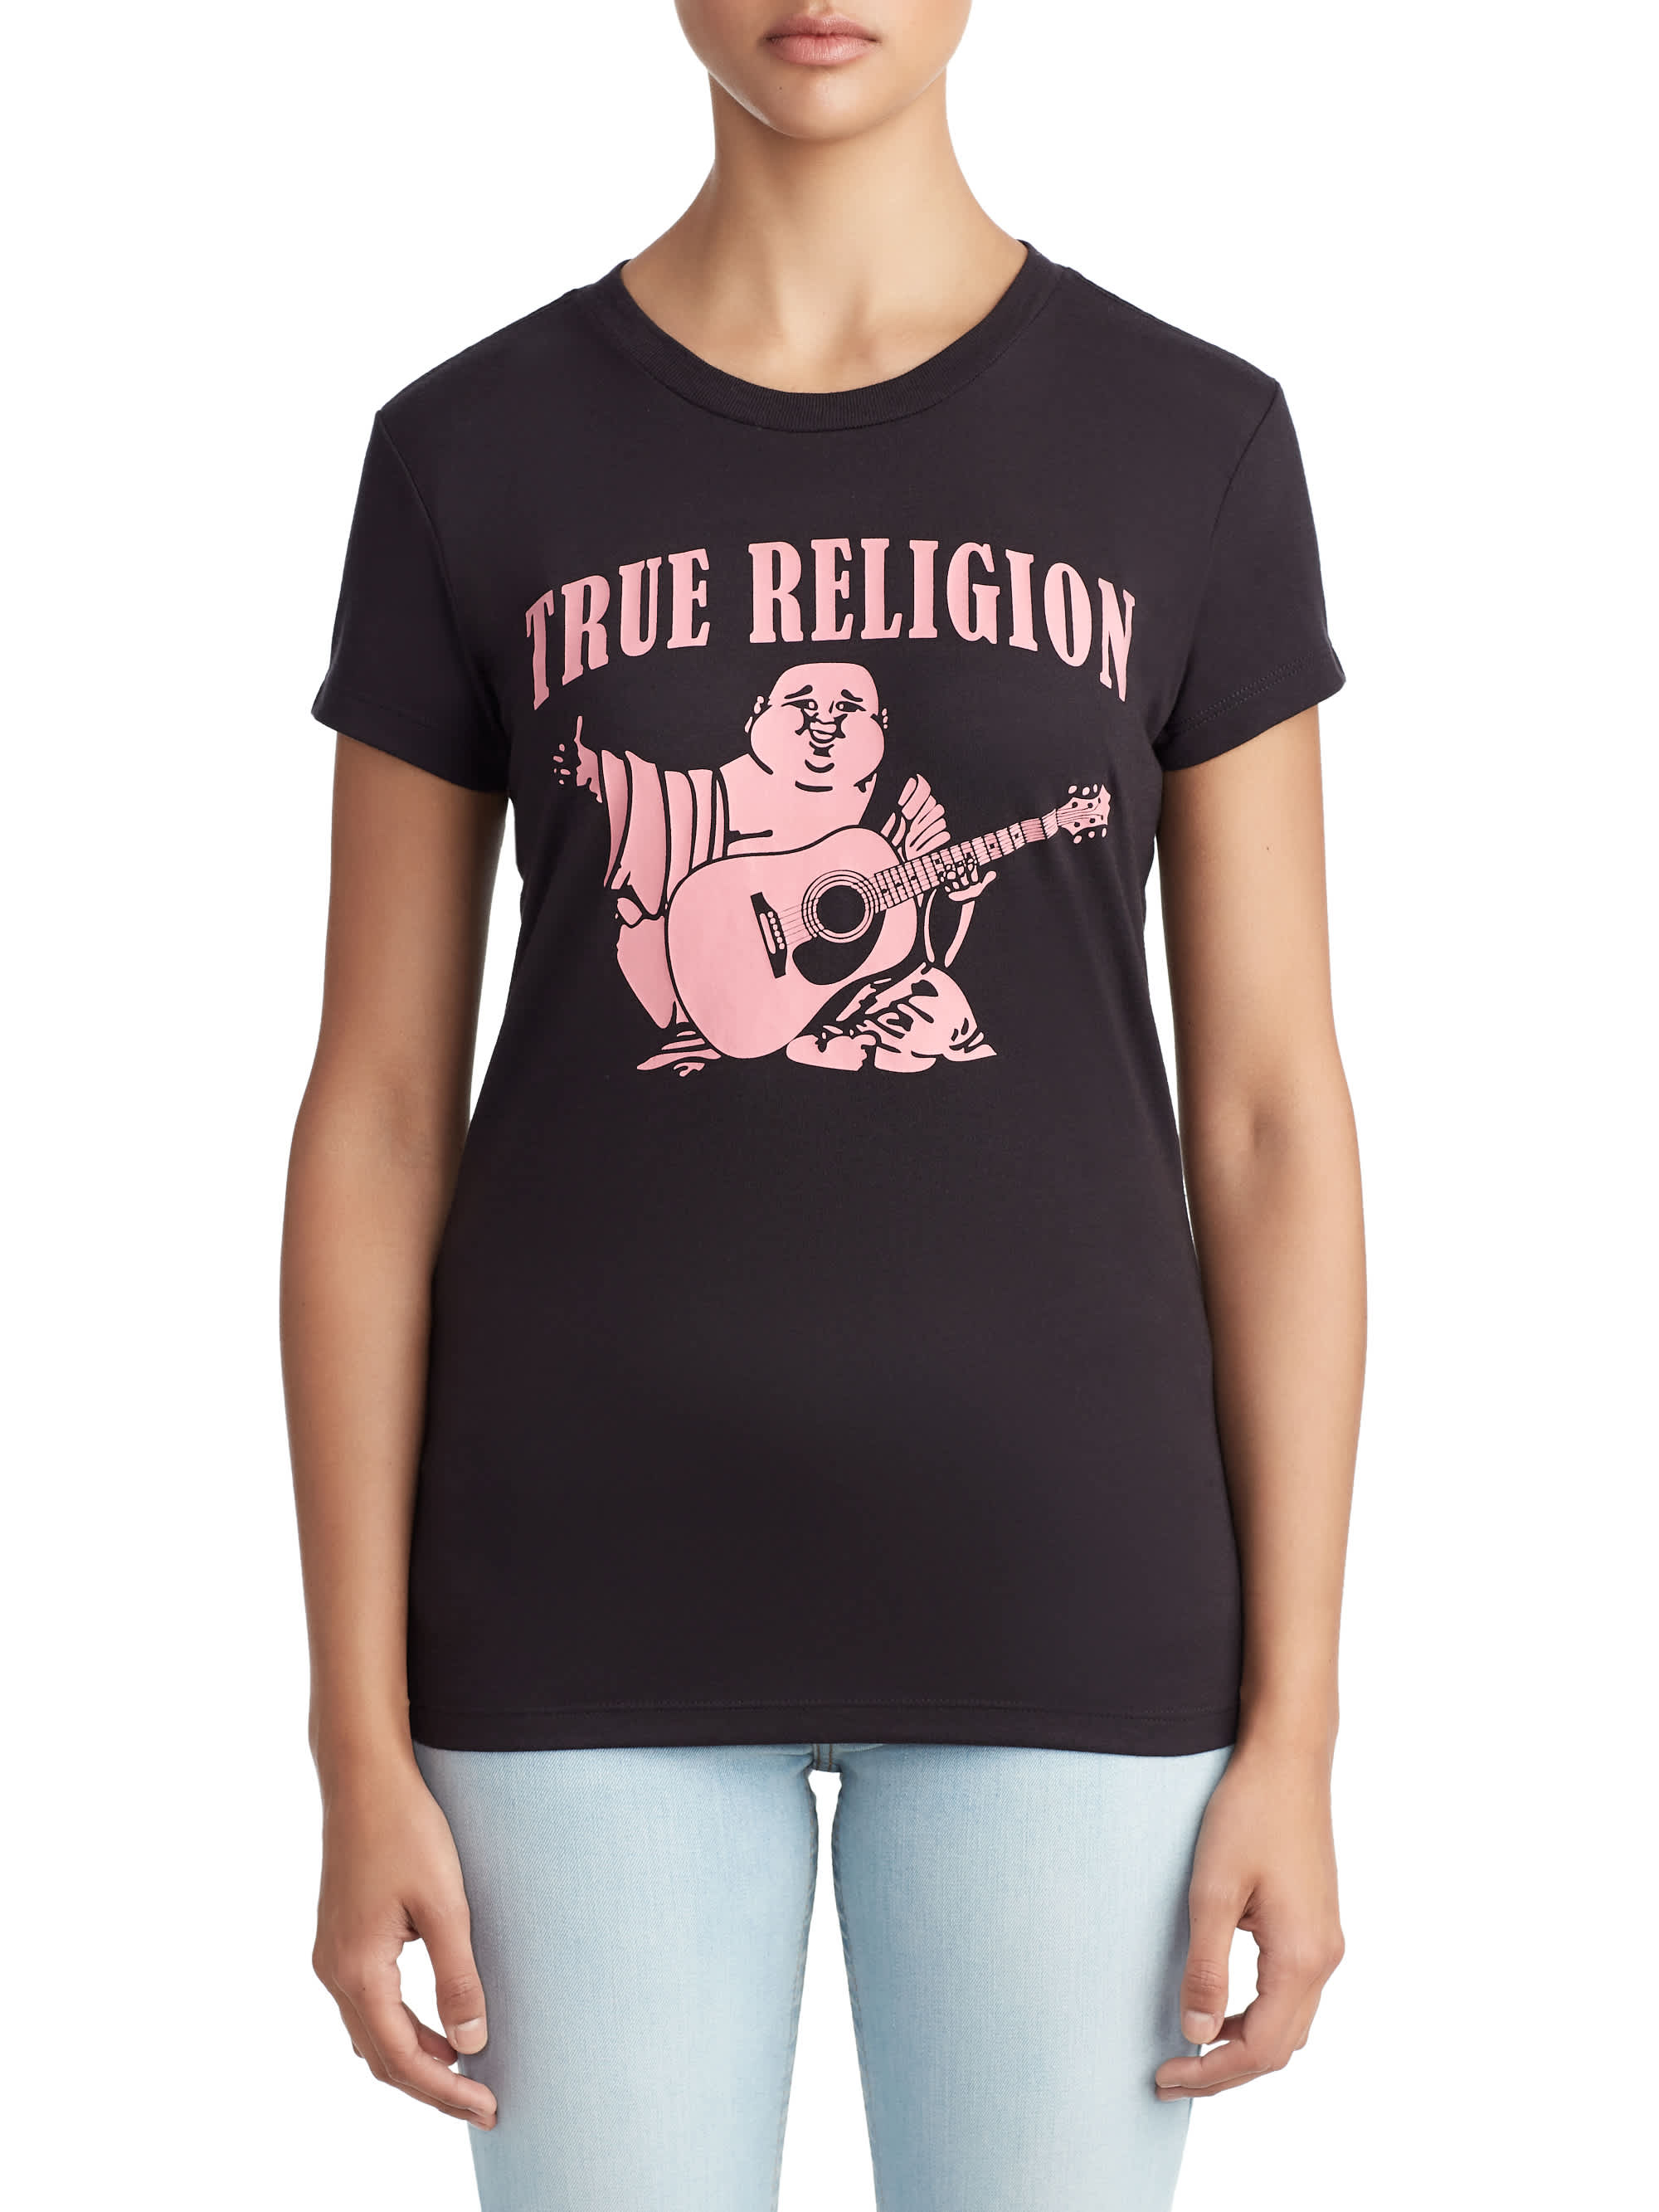 WOMENS CLASSIC BUDDHA LOGO GRAPHIC TEE FOR BREAST CANCER